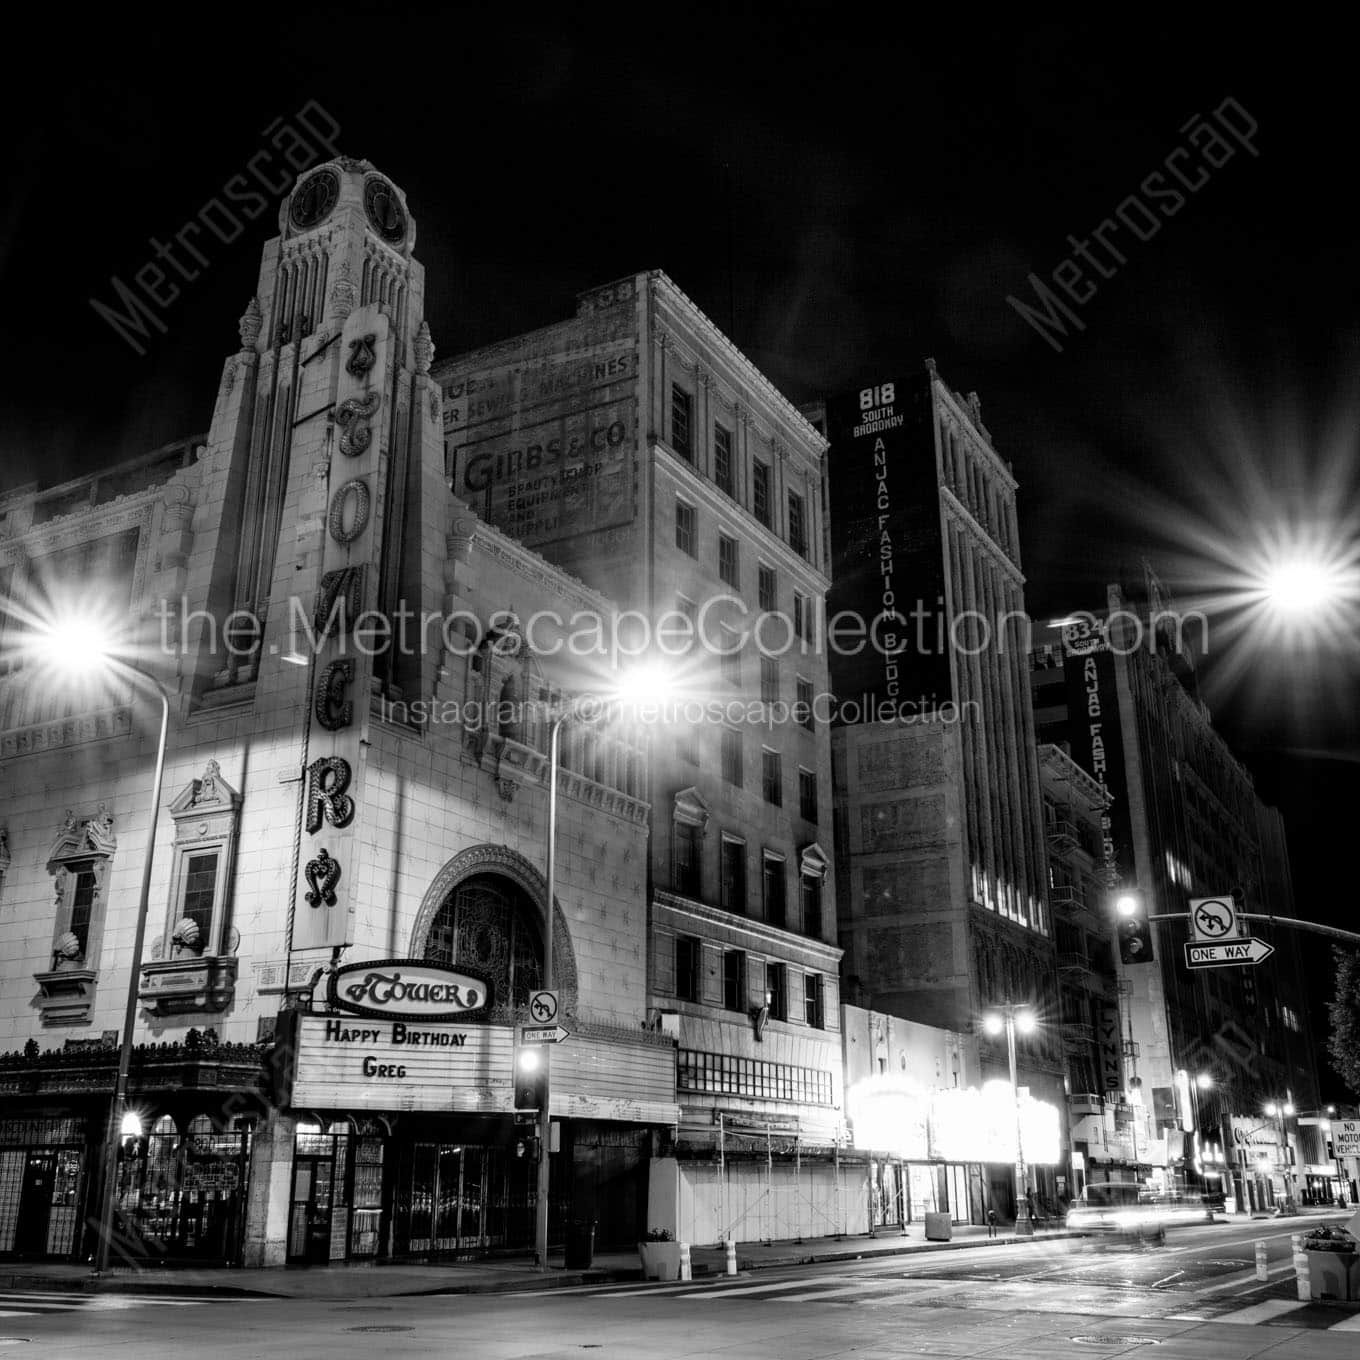 tower theater at night Black & White Office Art